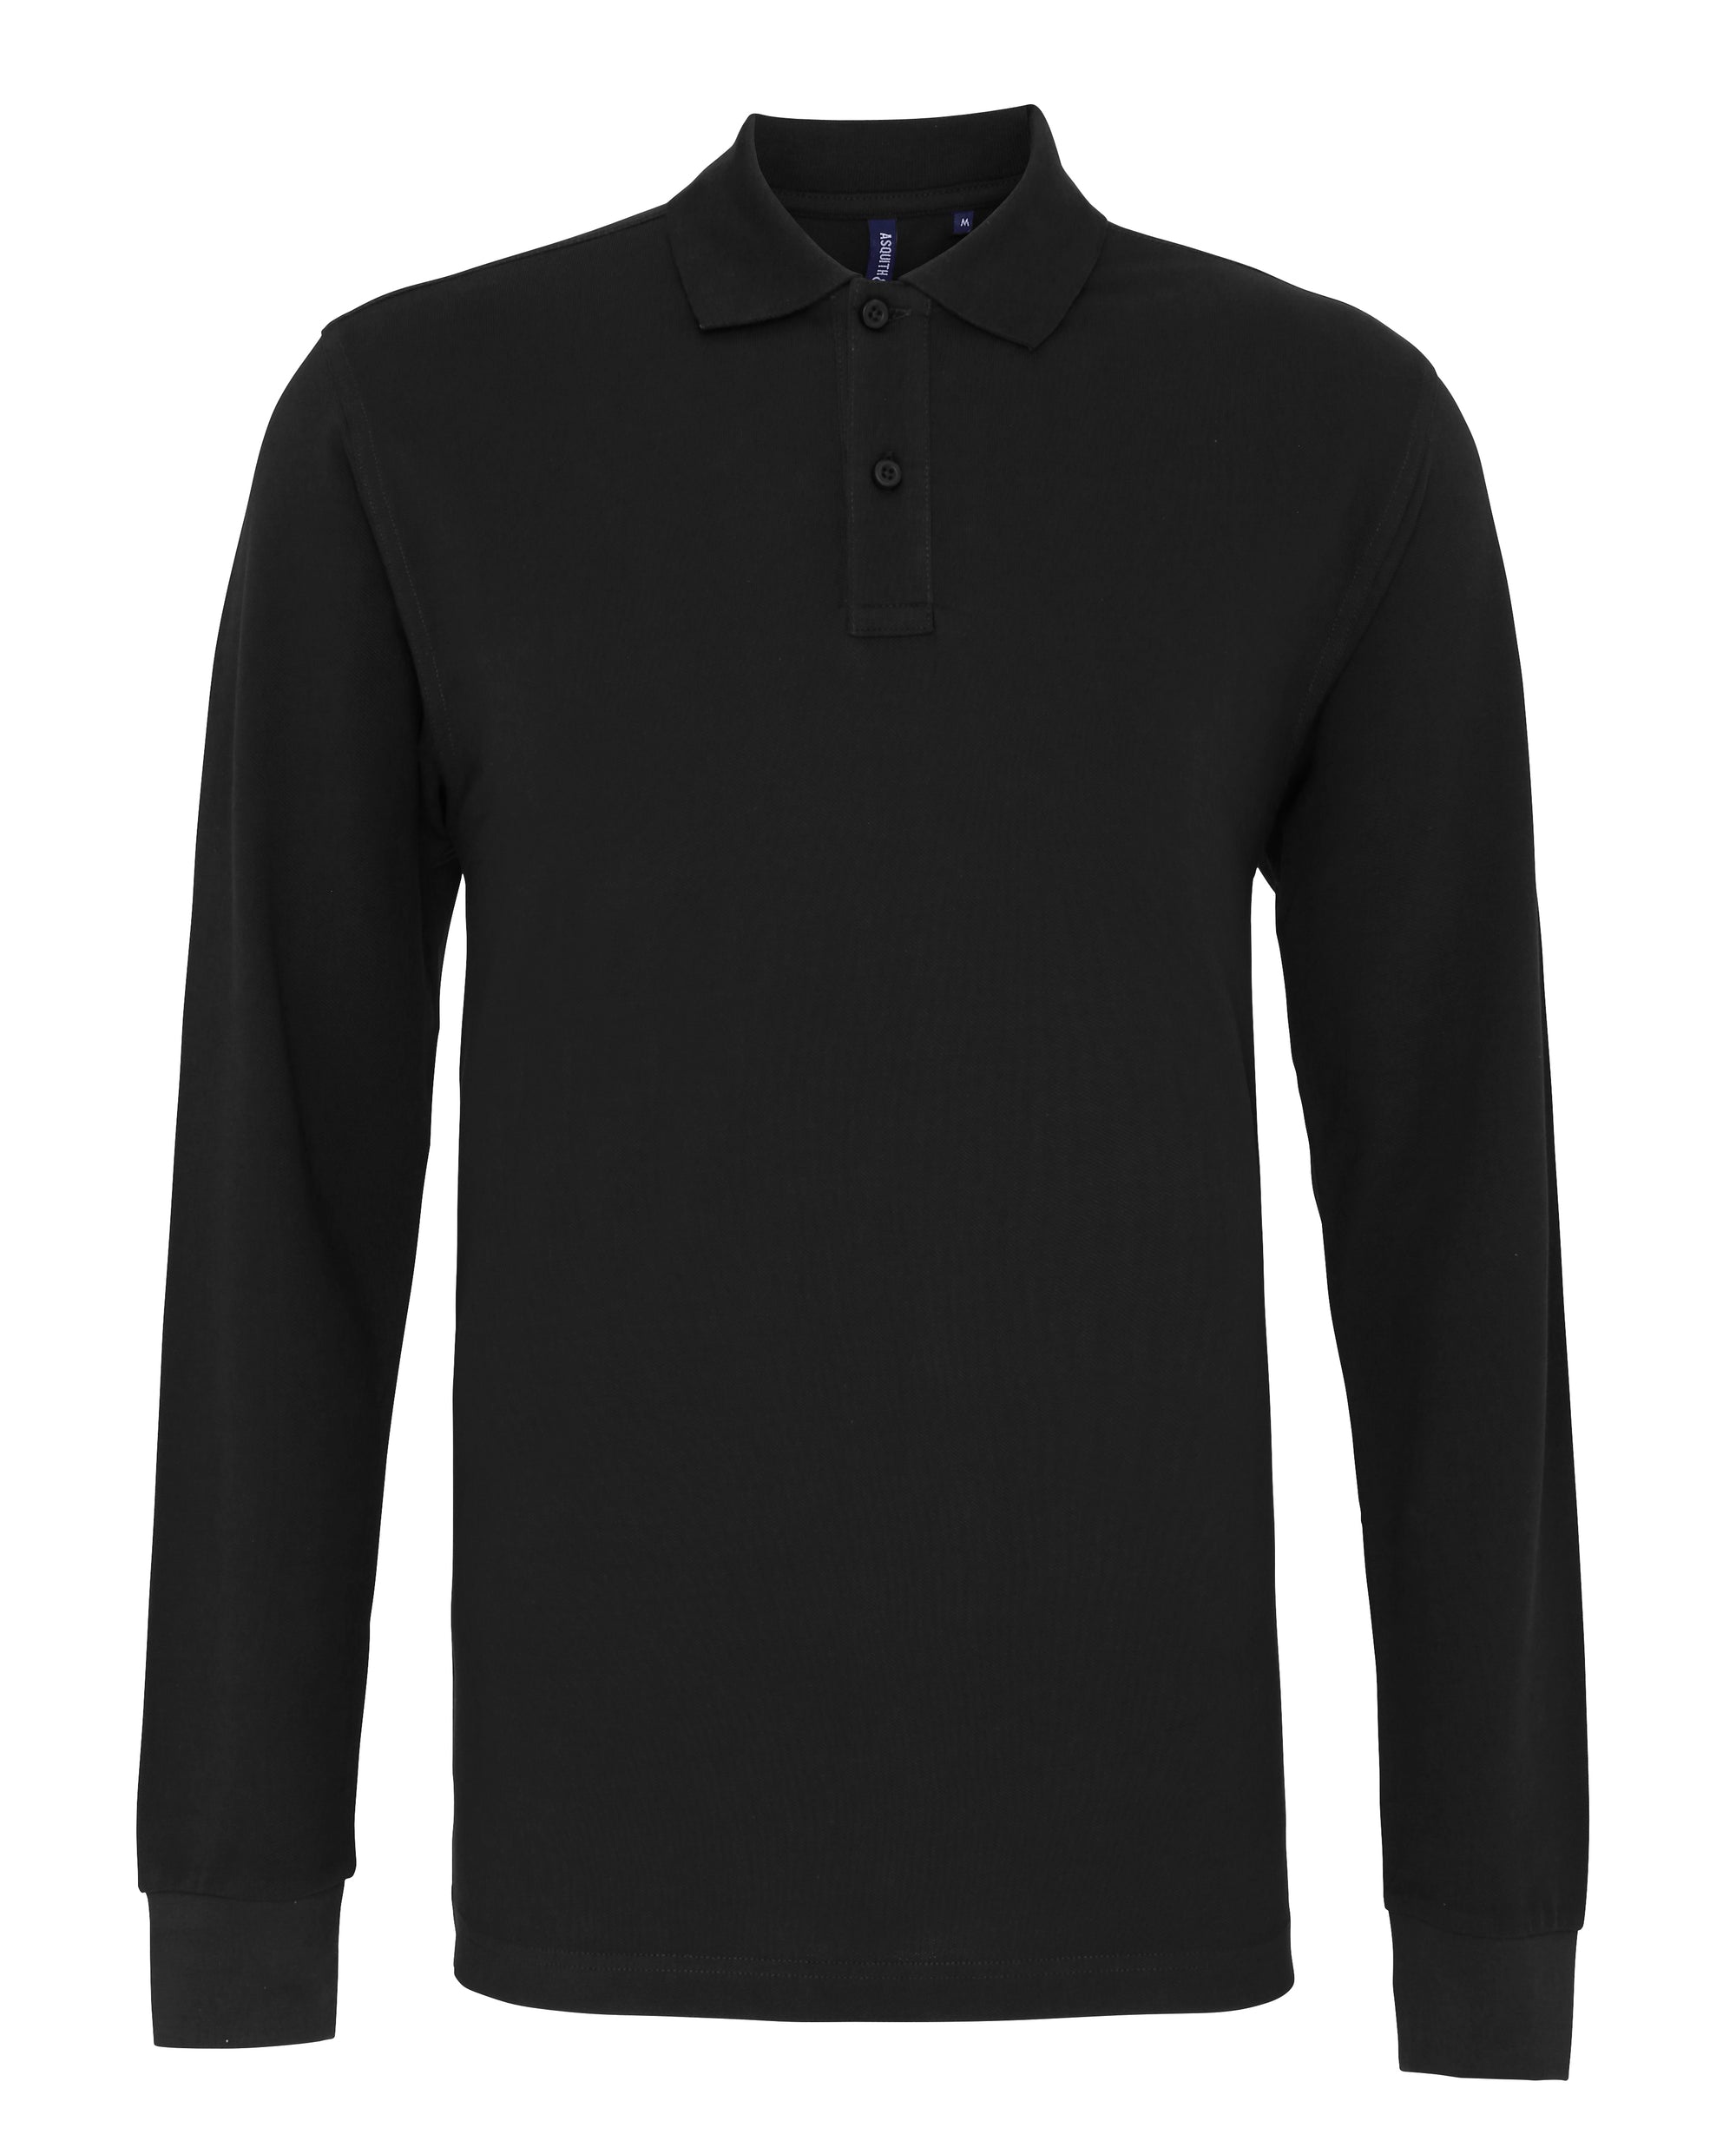 Mens Classic Fit Long Sleeve Polo